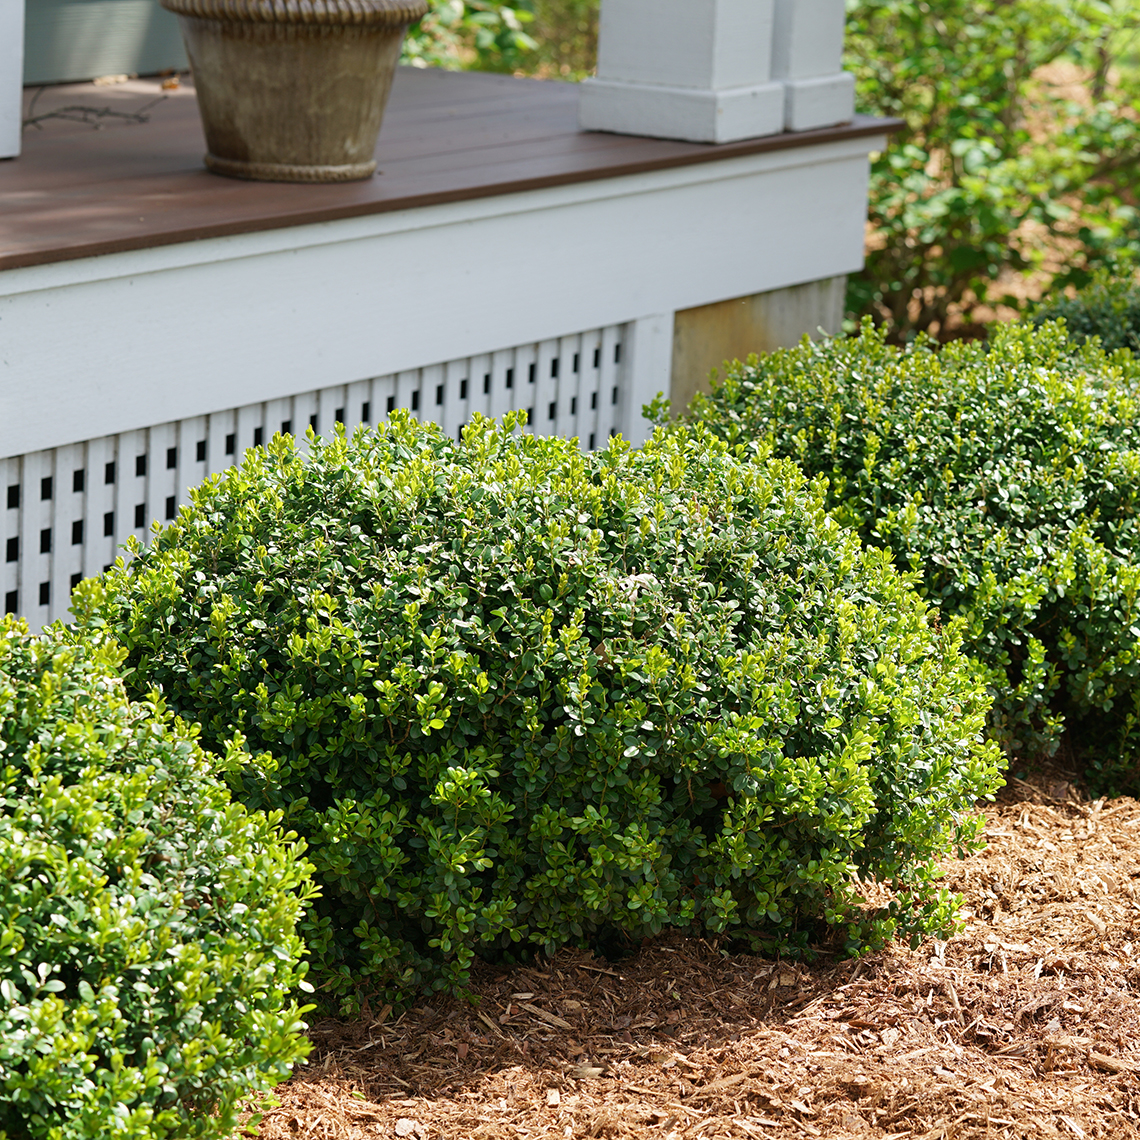 Sprinter Buxus shrubs planted in a row in front of a porch